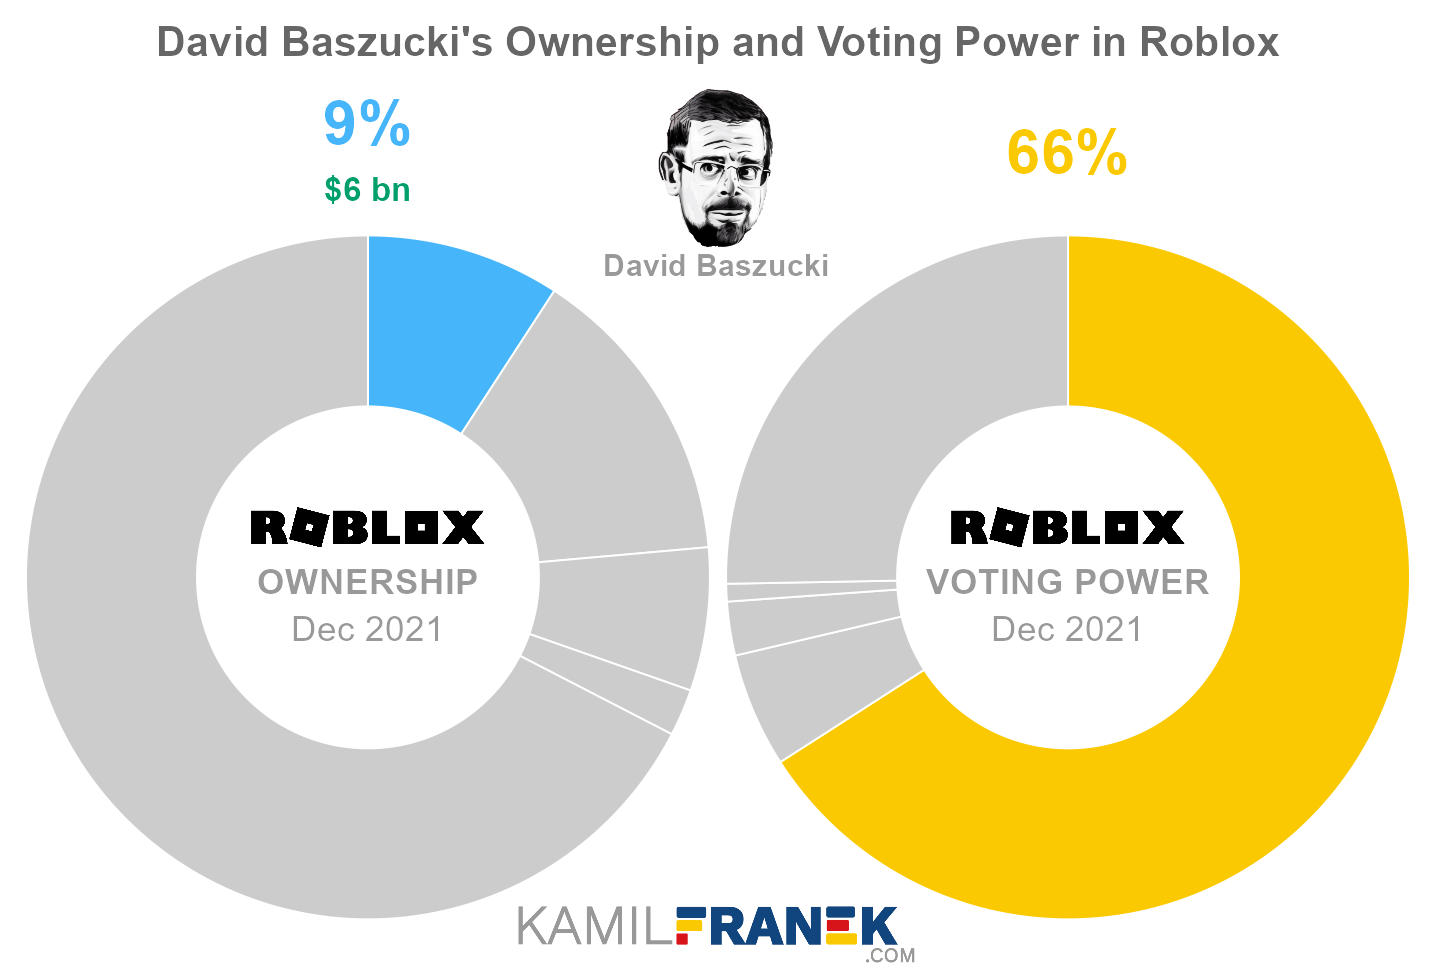 Roblox largest shareholders share ownership vs vote control chart